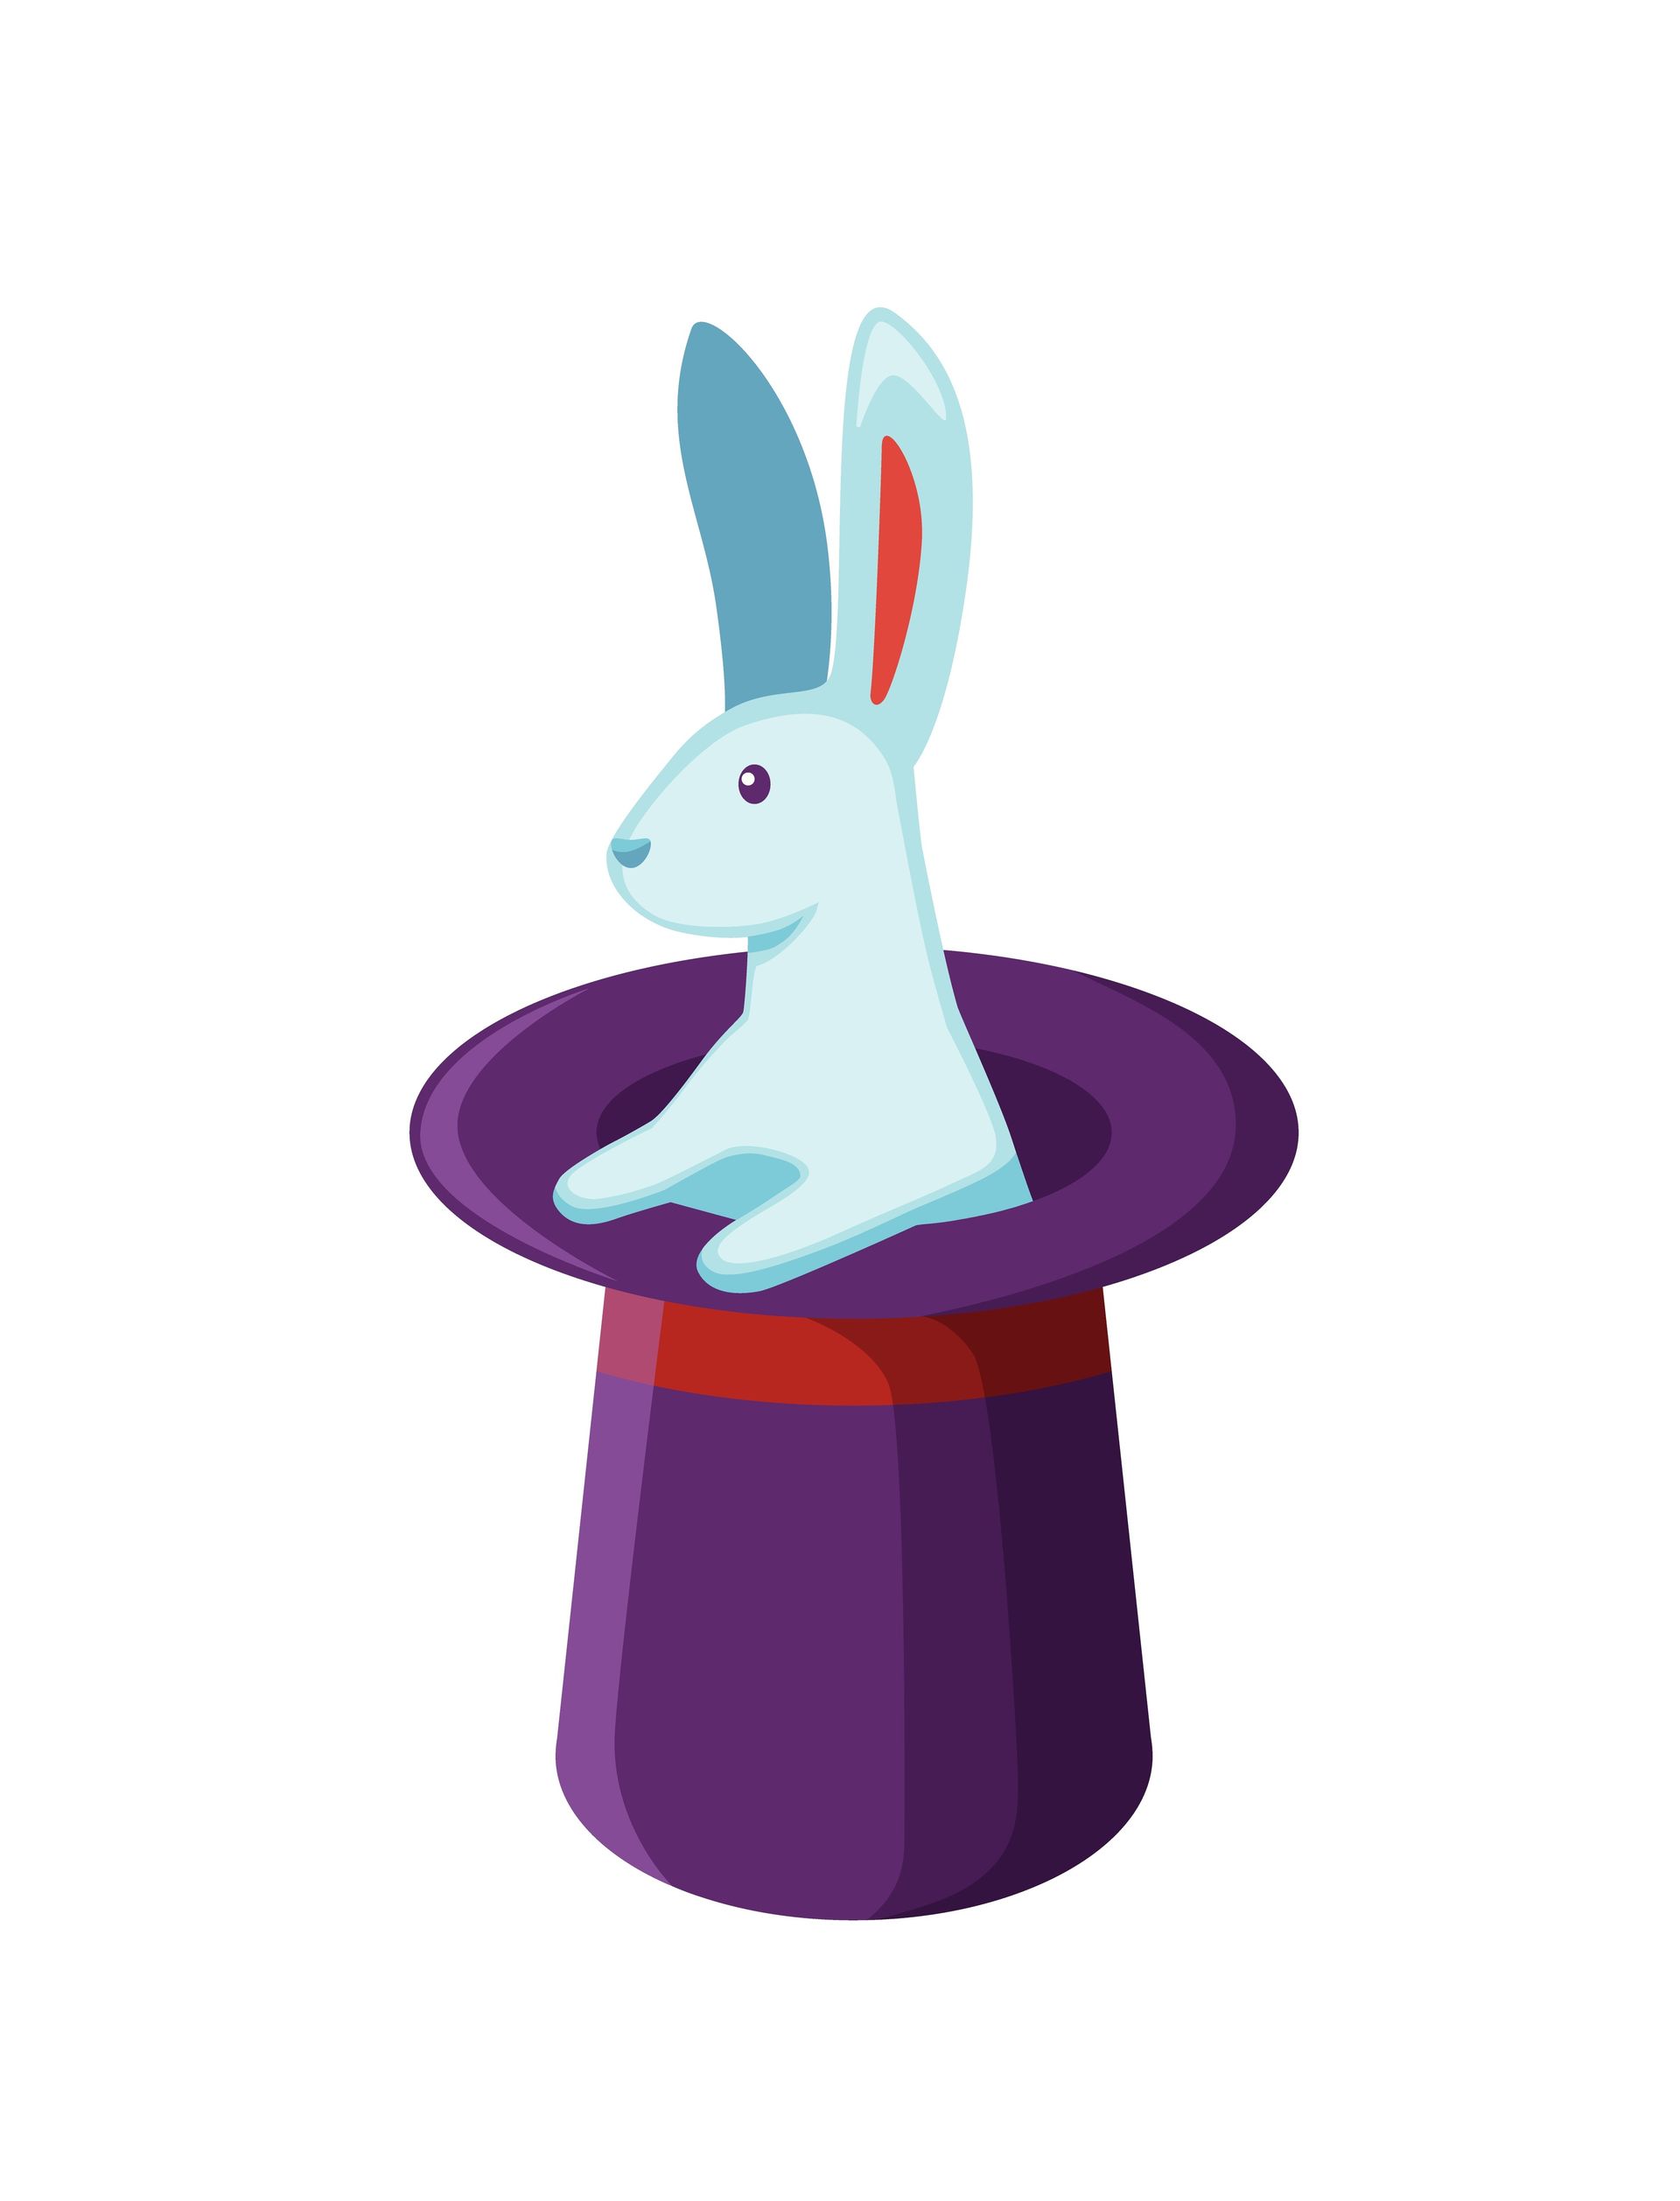 A white rabbit is sitting in a purple top hat.